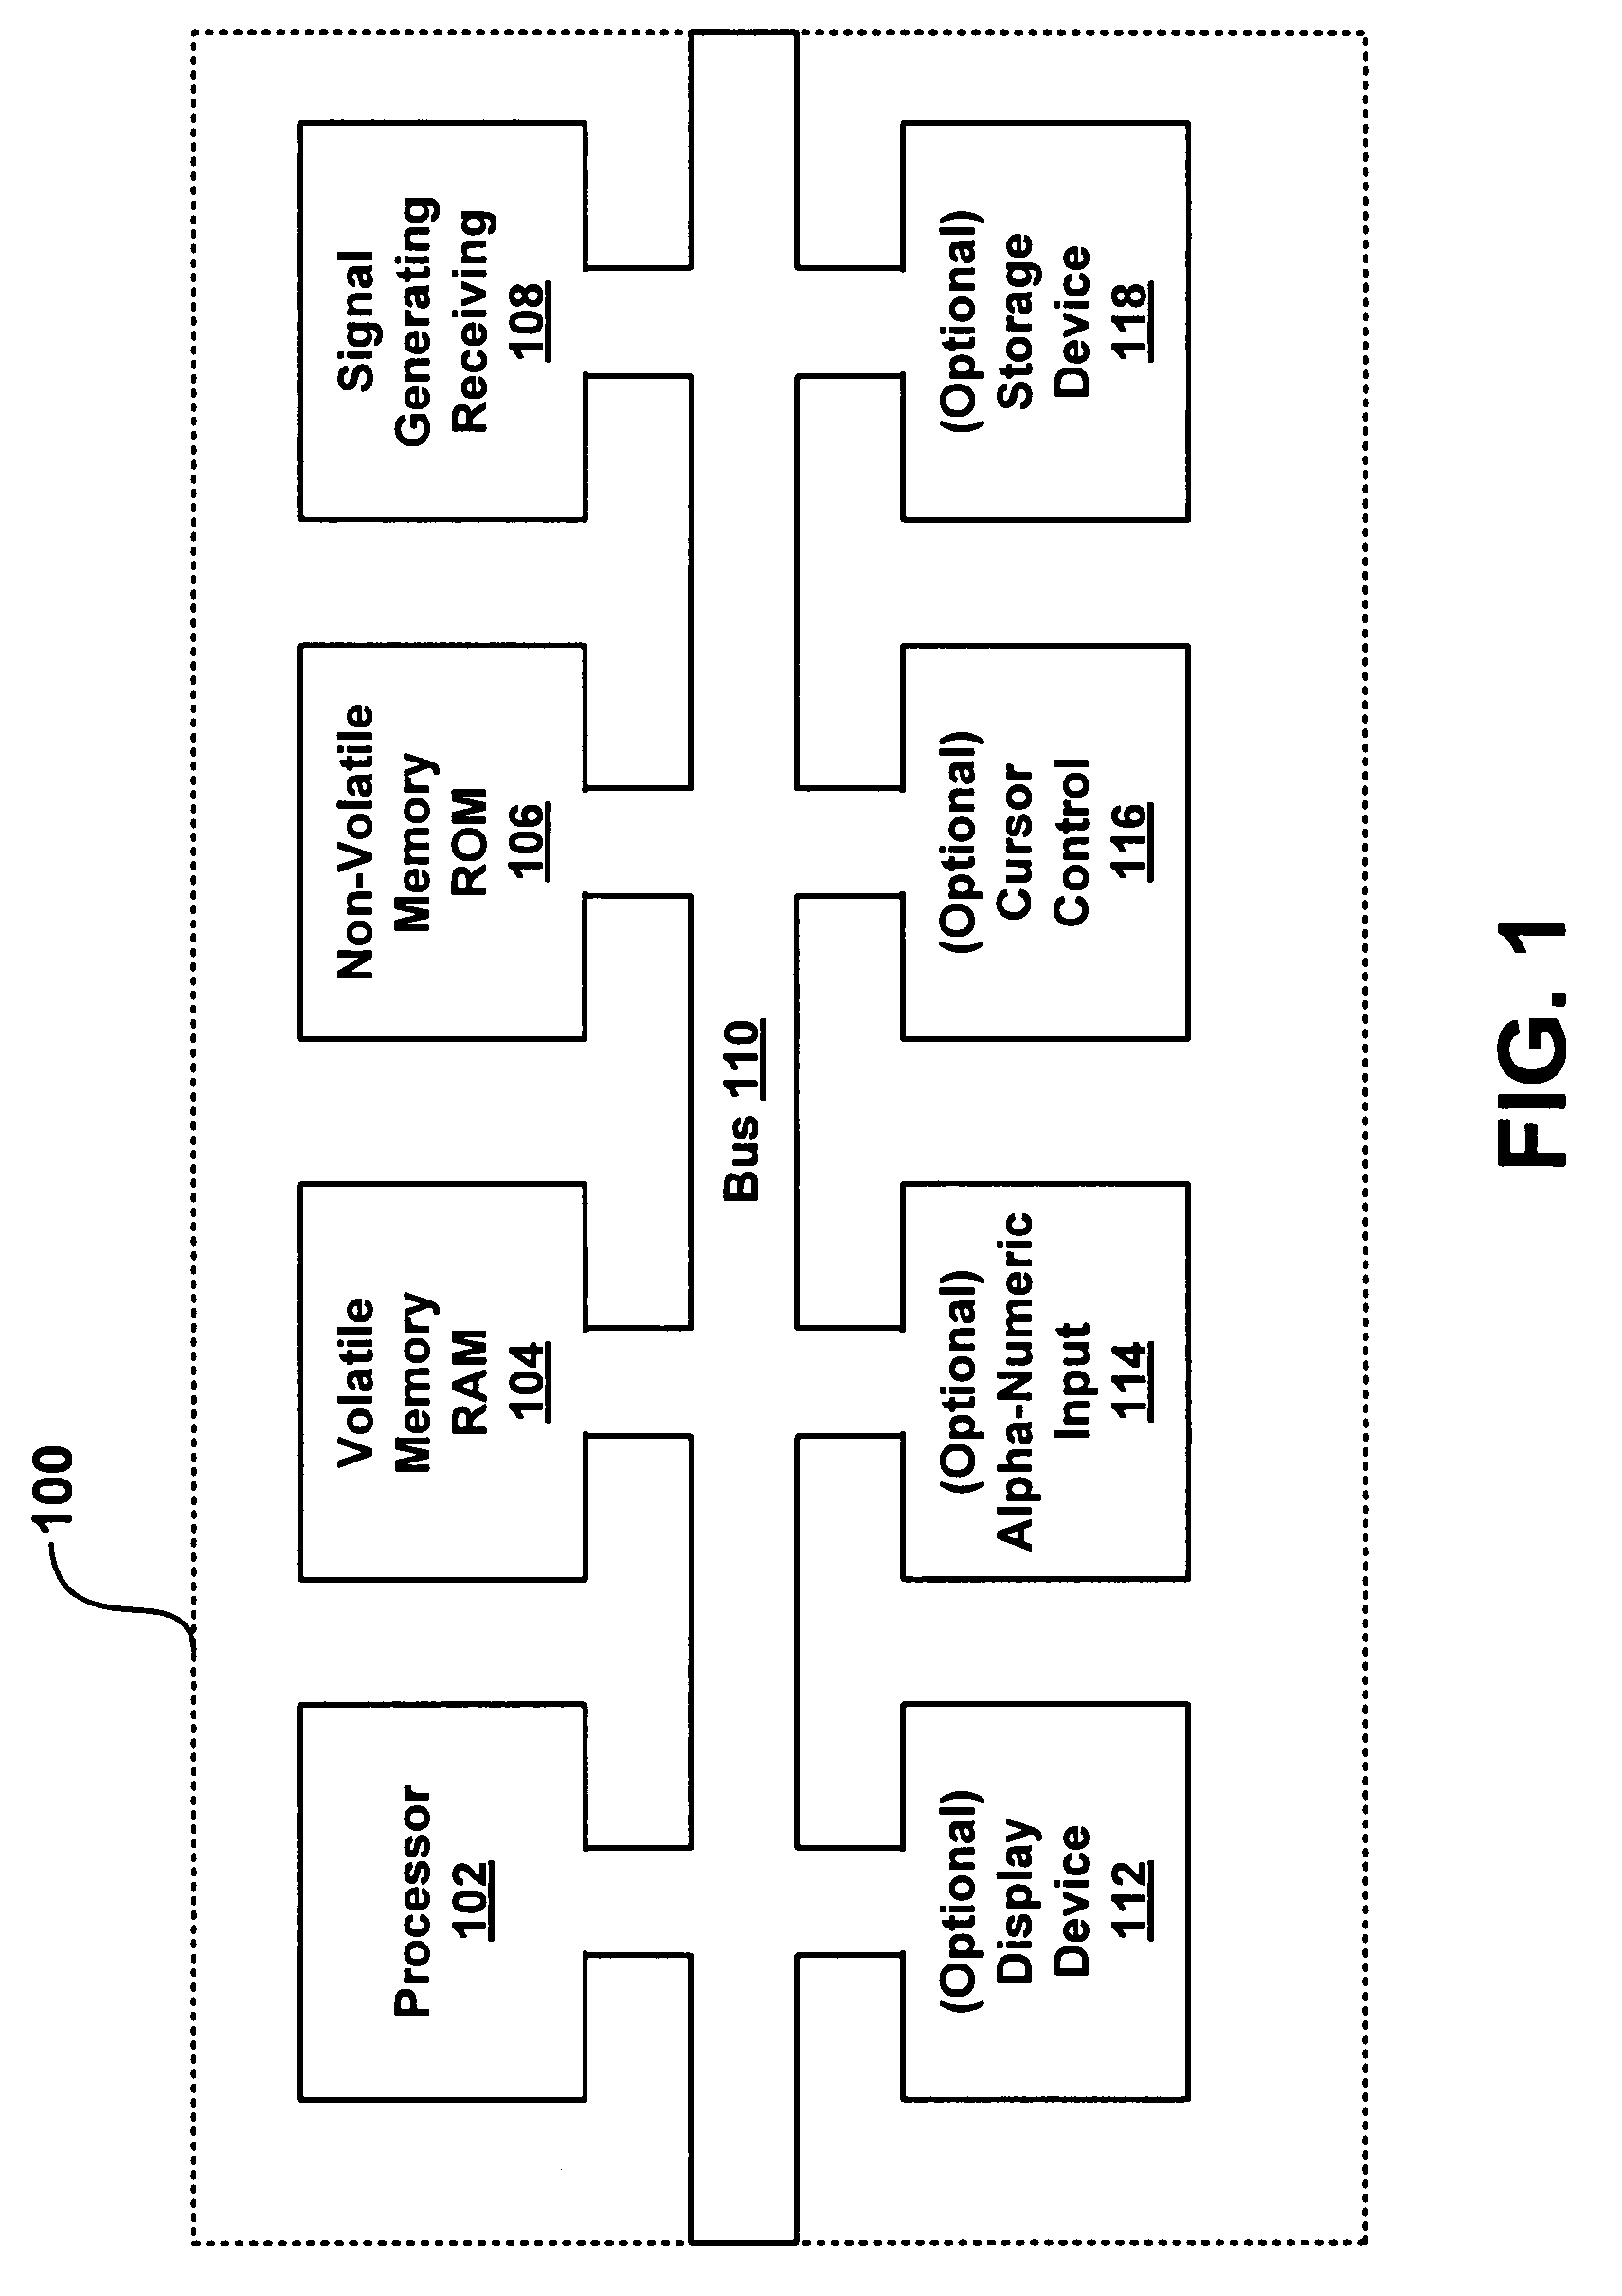 System and method for asset management